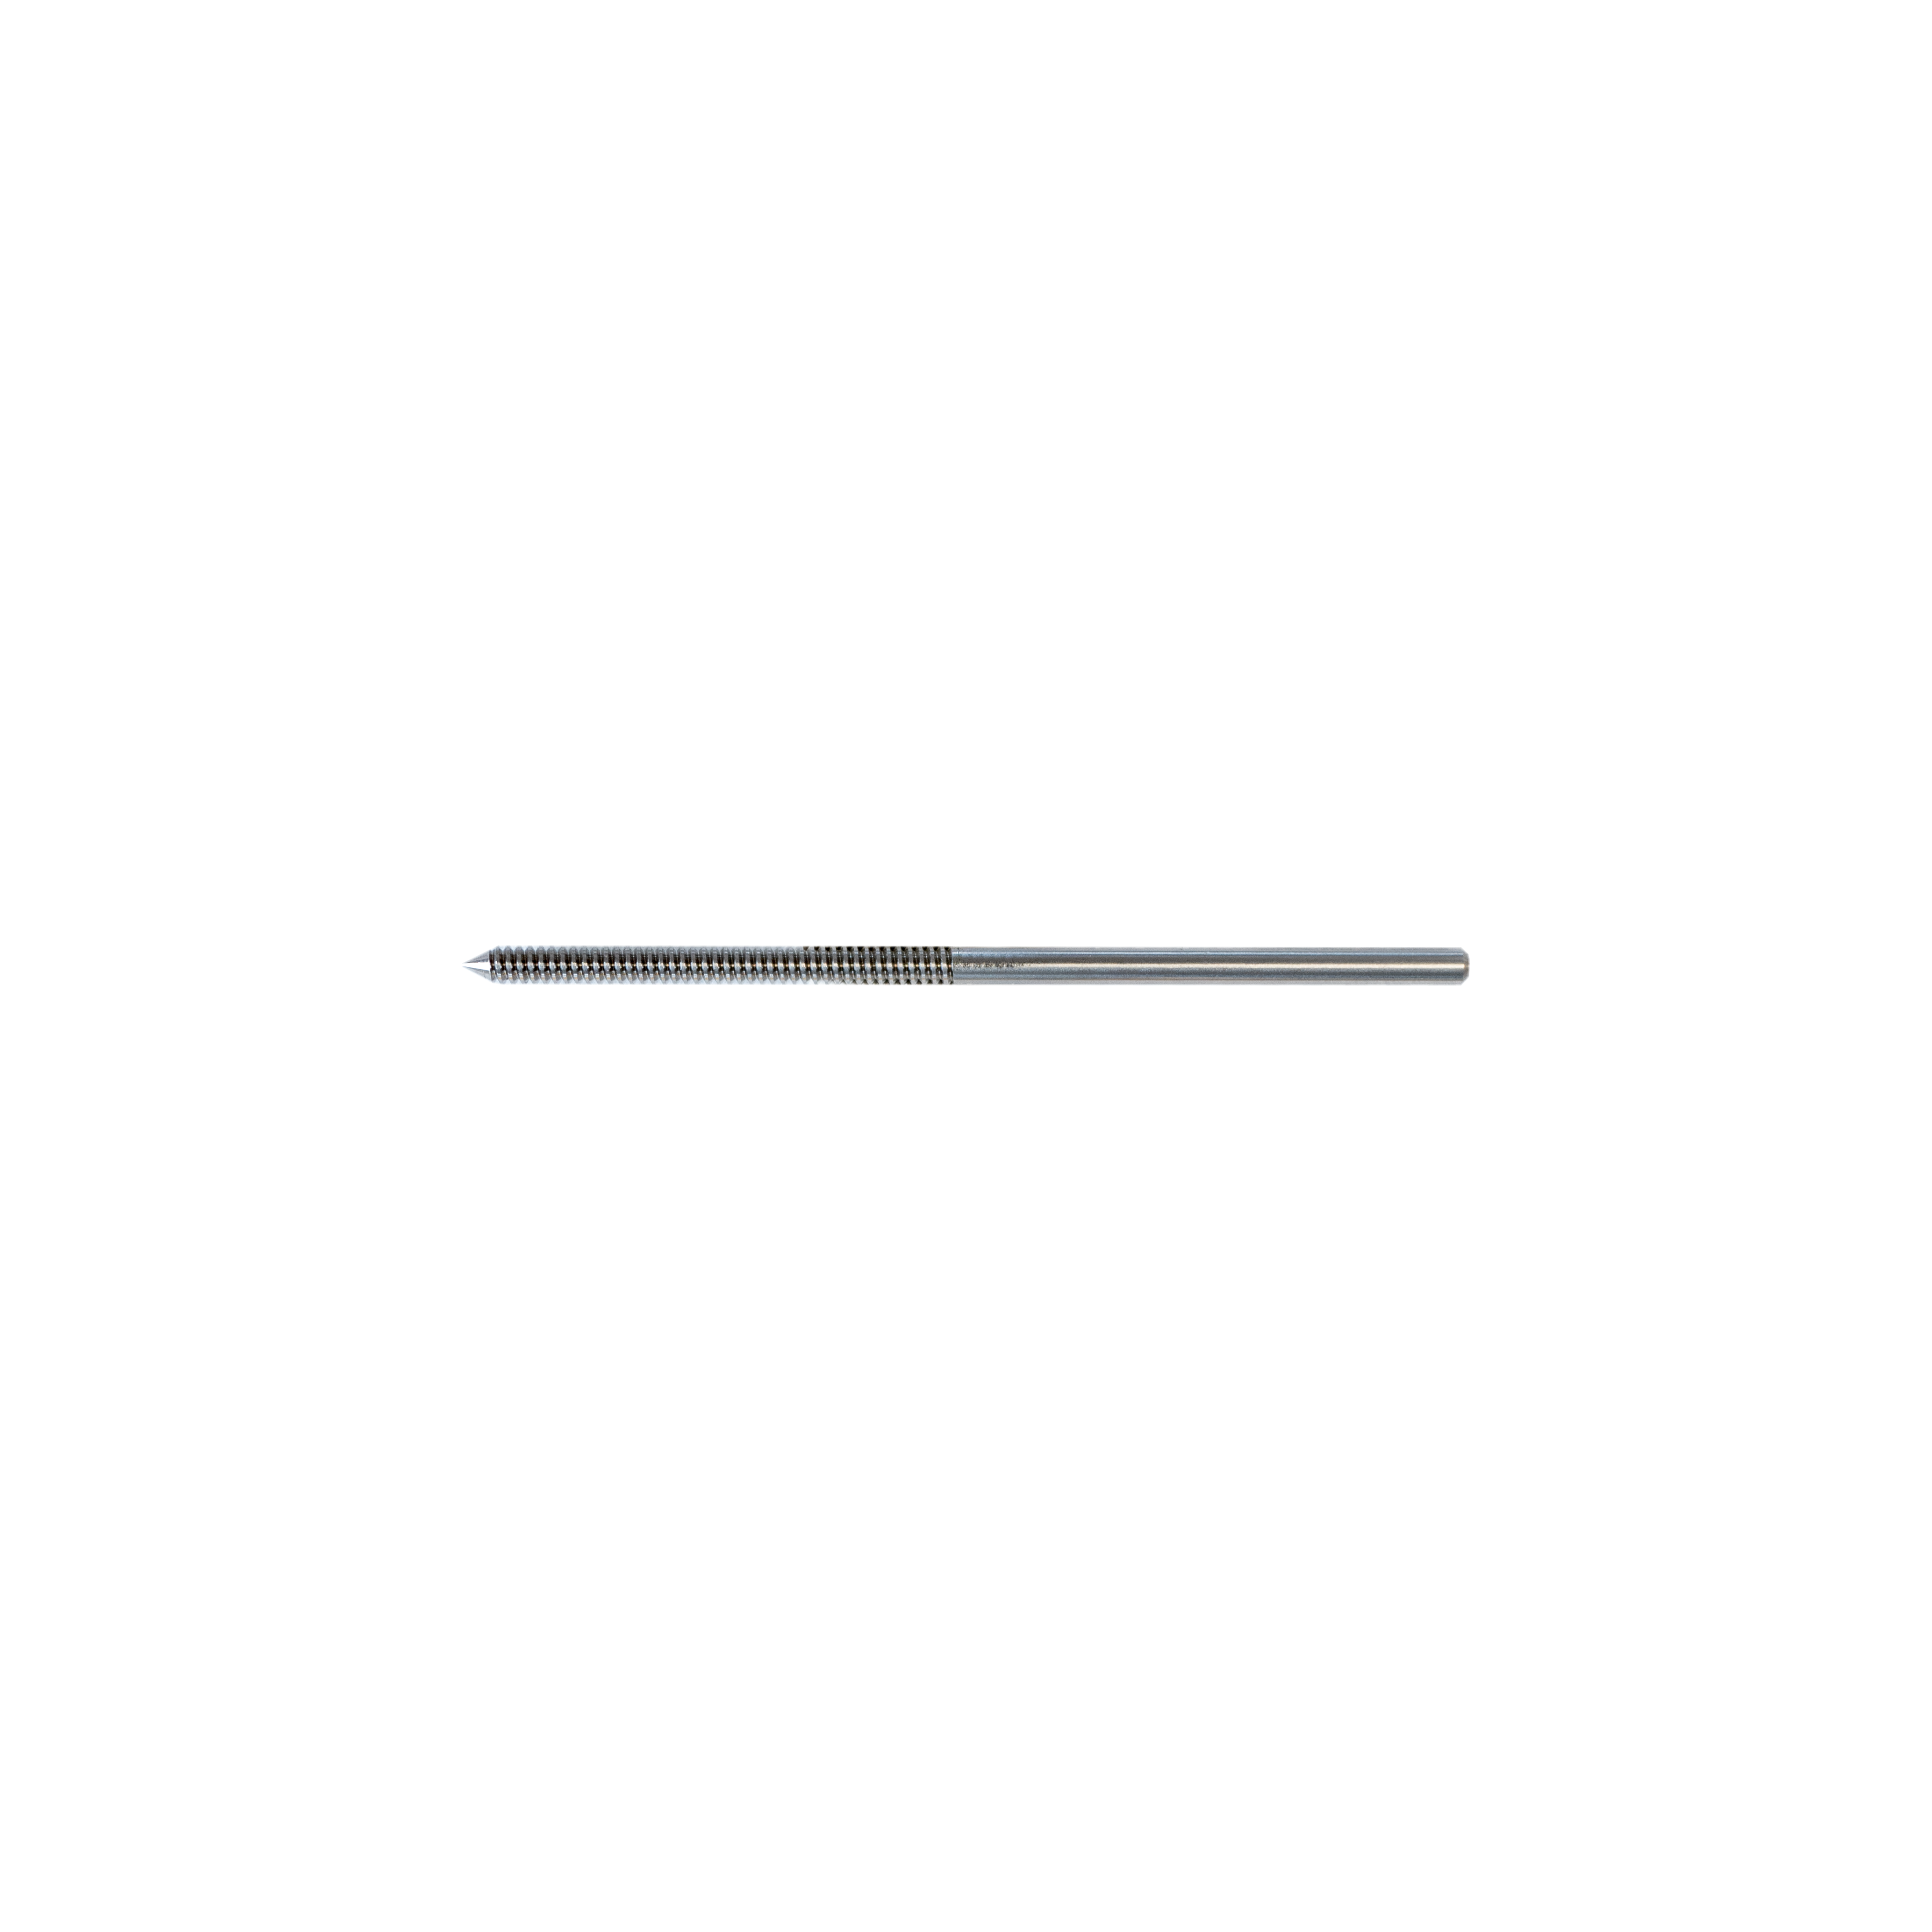 French screws, cut thread, Stainless steel